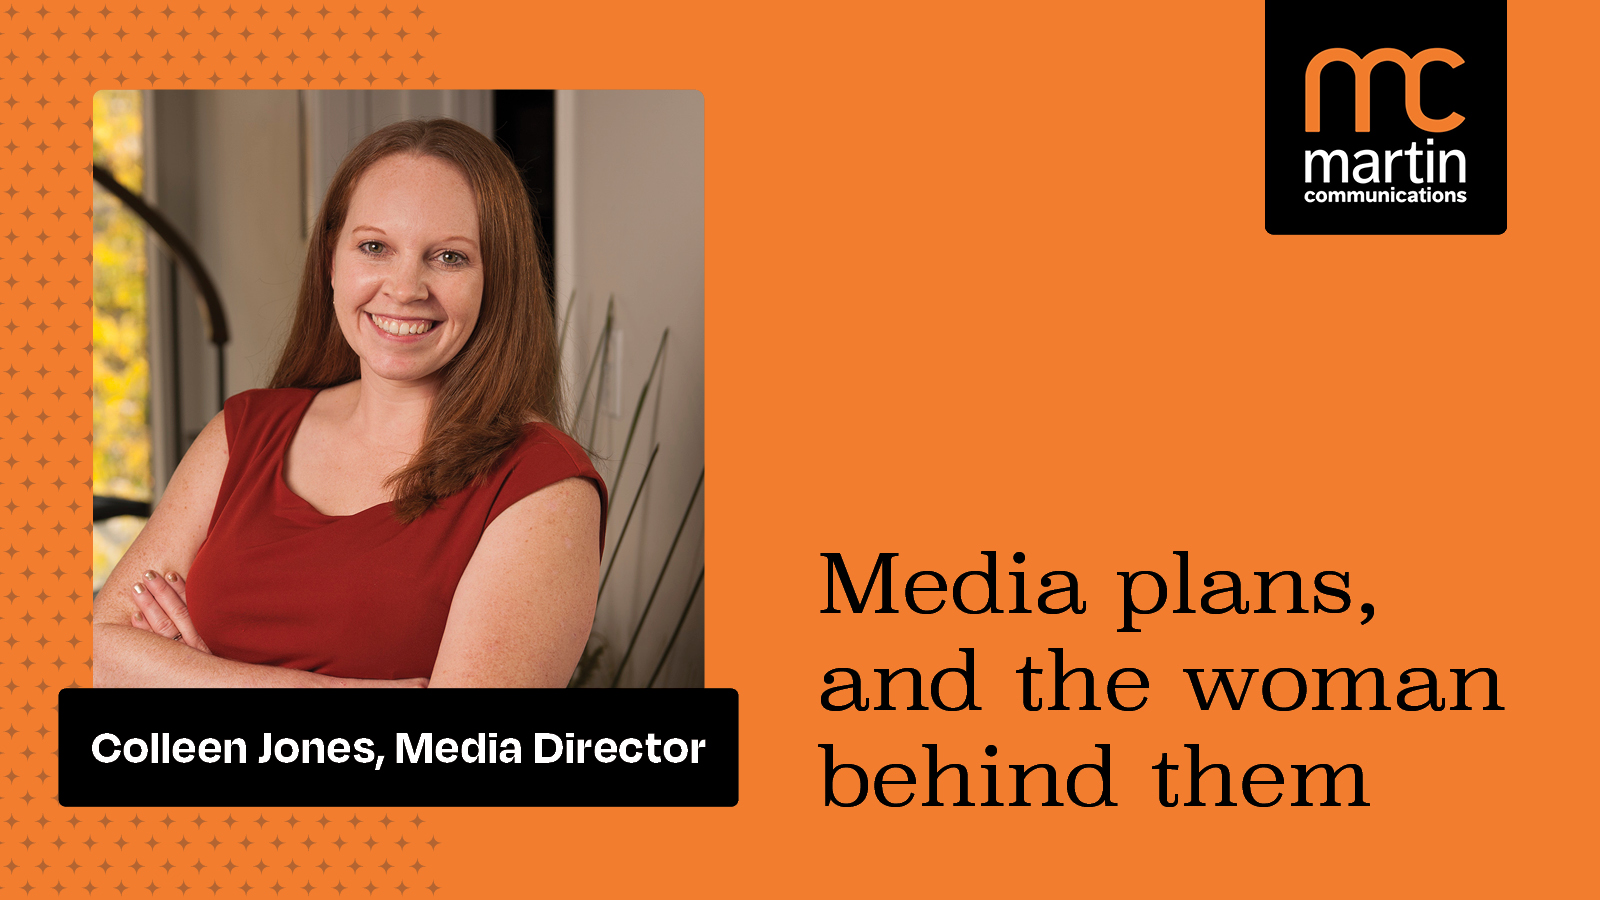 Martin Communications media plans and the woman behind them